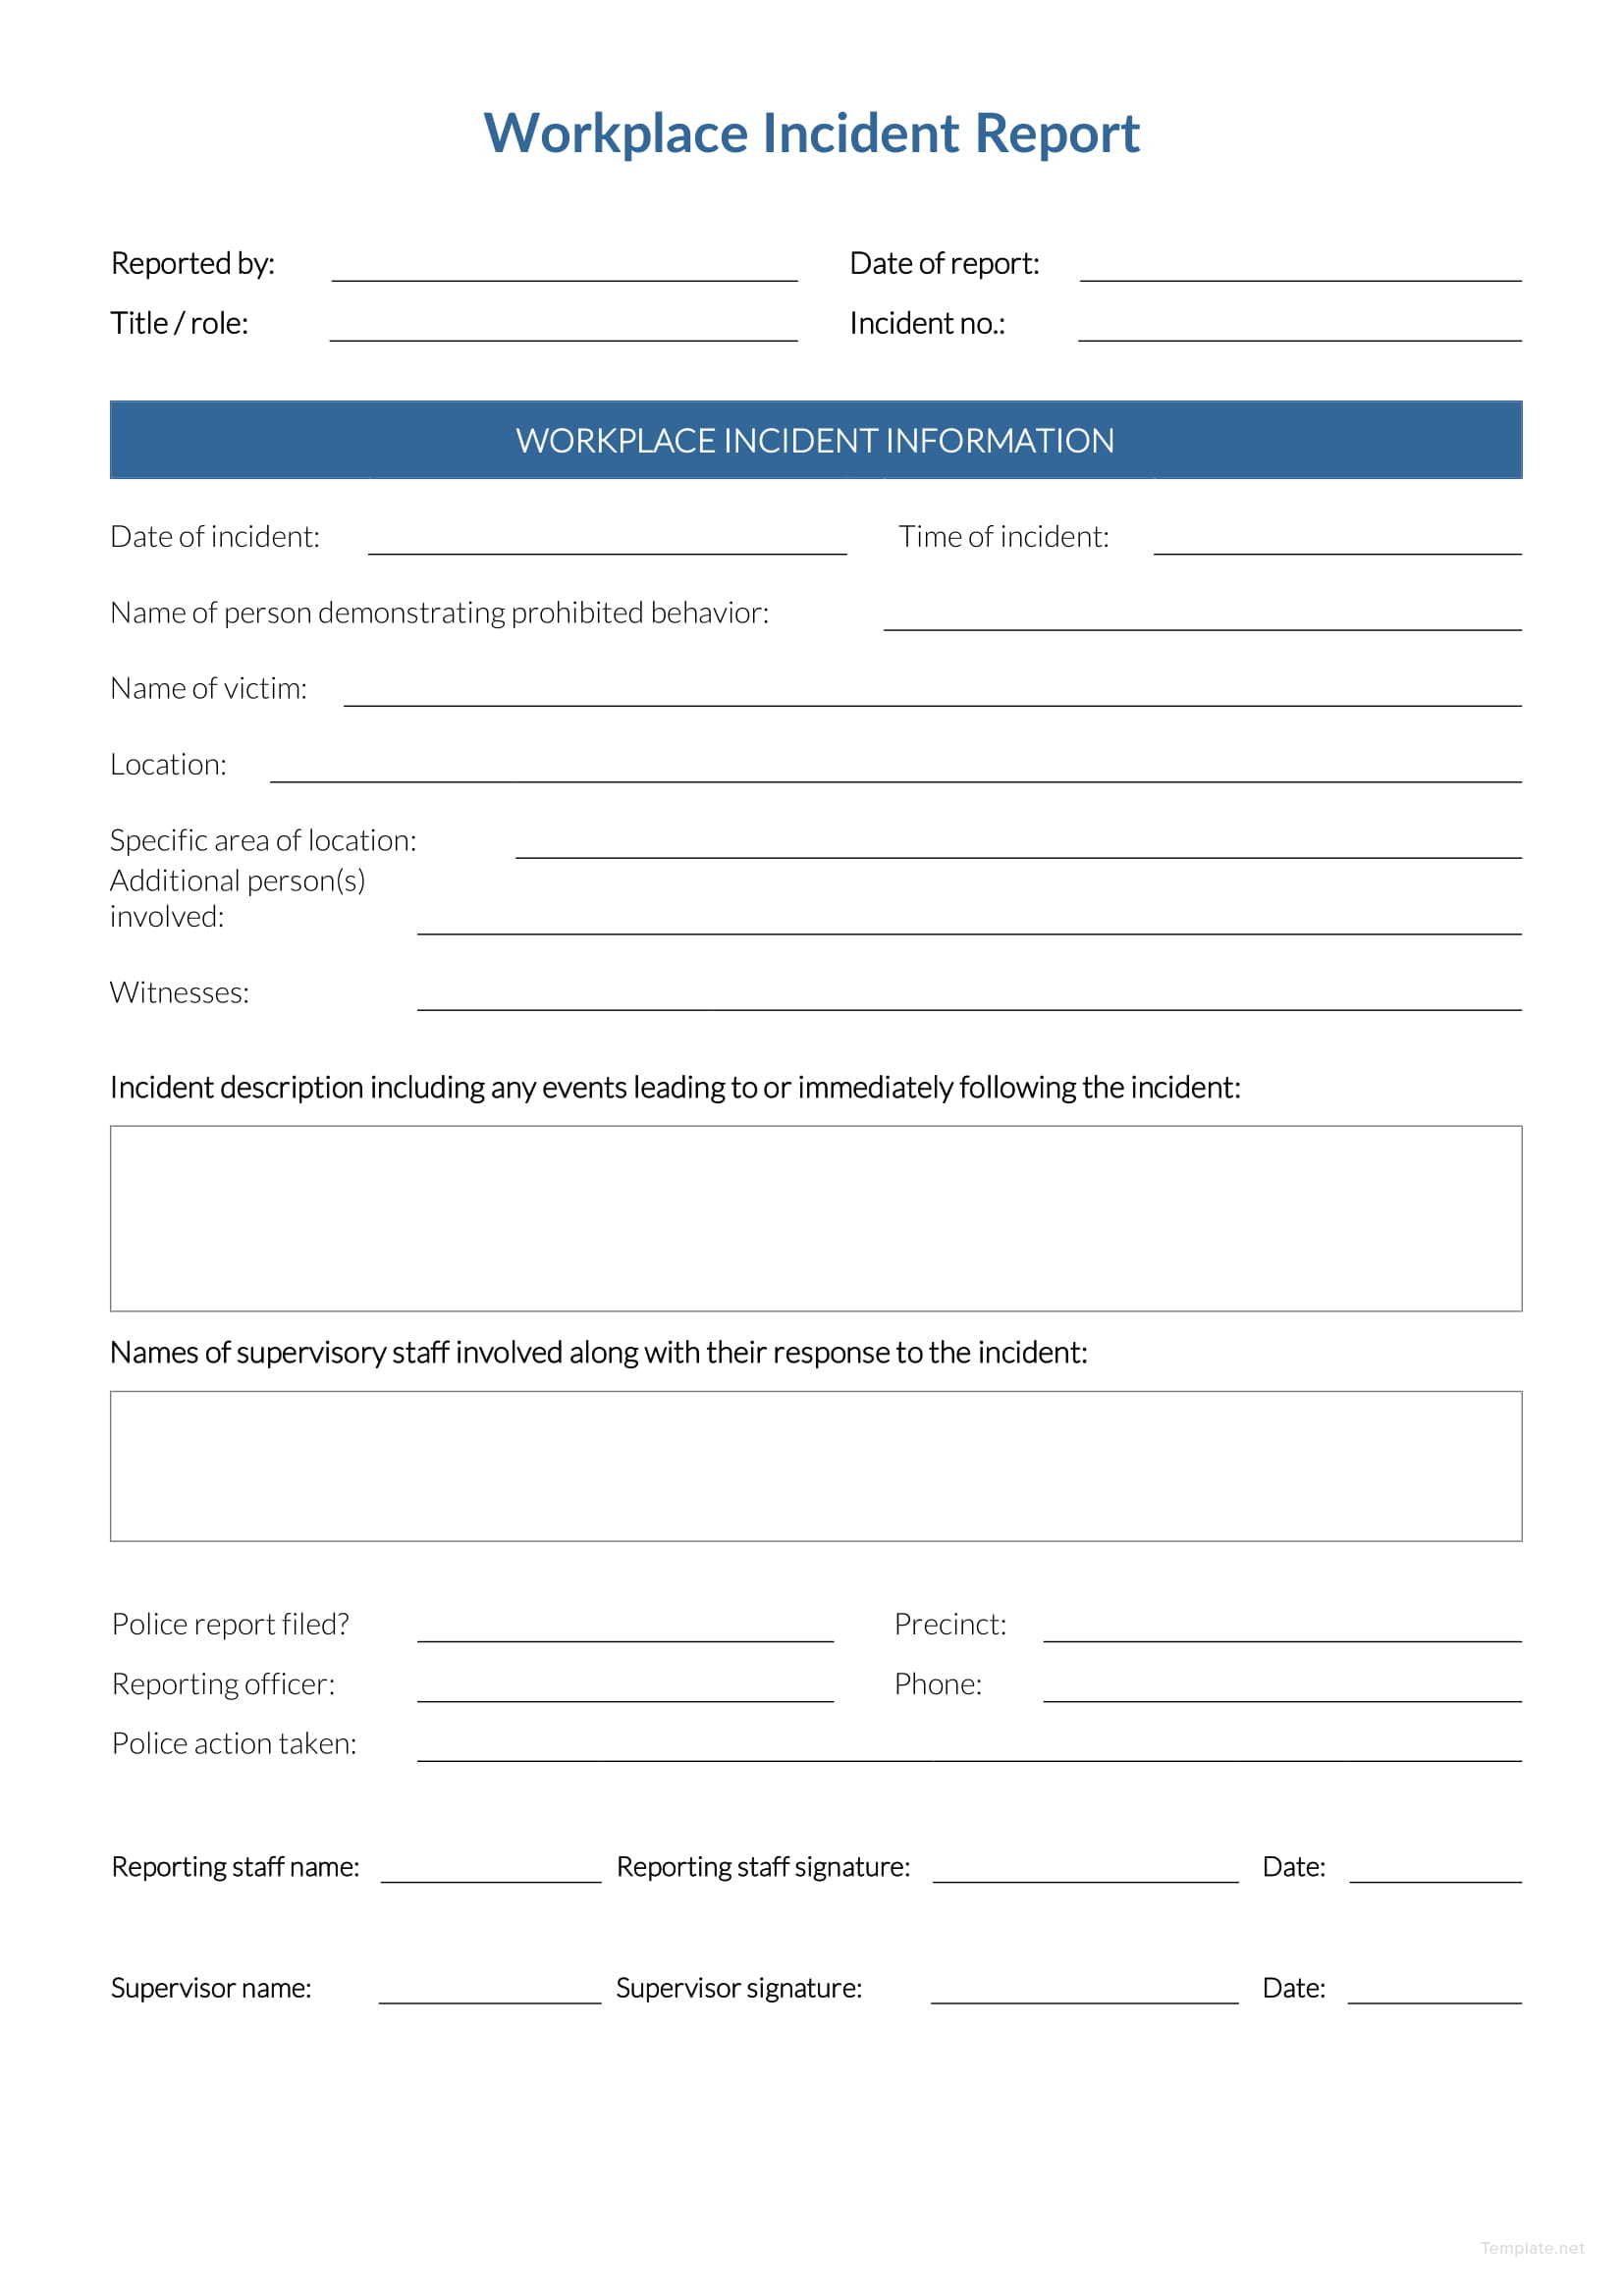 Workplace Incident Report Template in Microsoft word, PDF